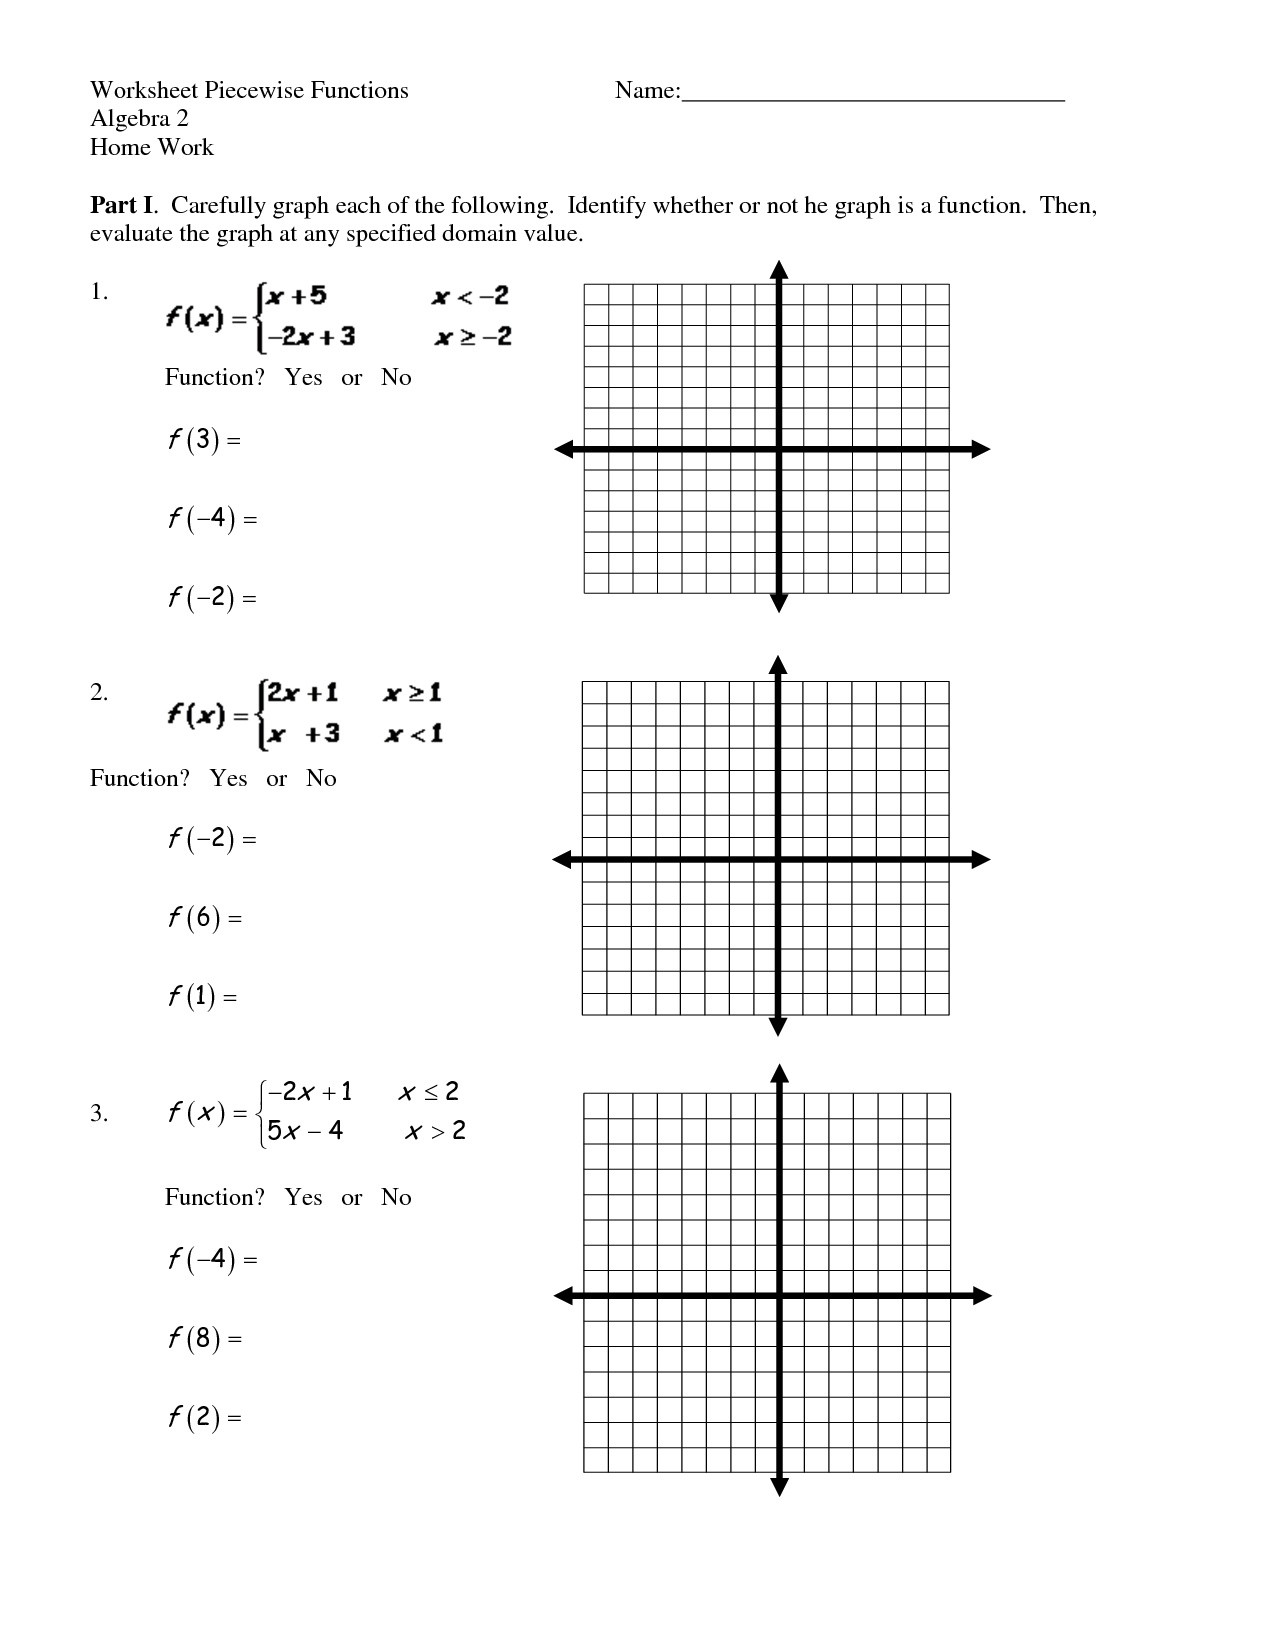 Worksheet Piecewise Functions Answer Key Discovery Education Worksheet Answers